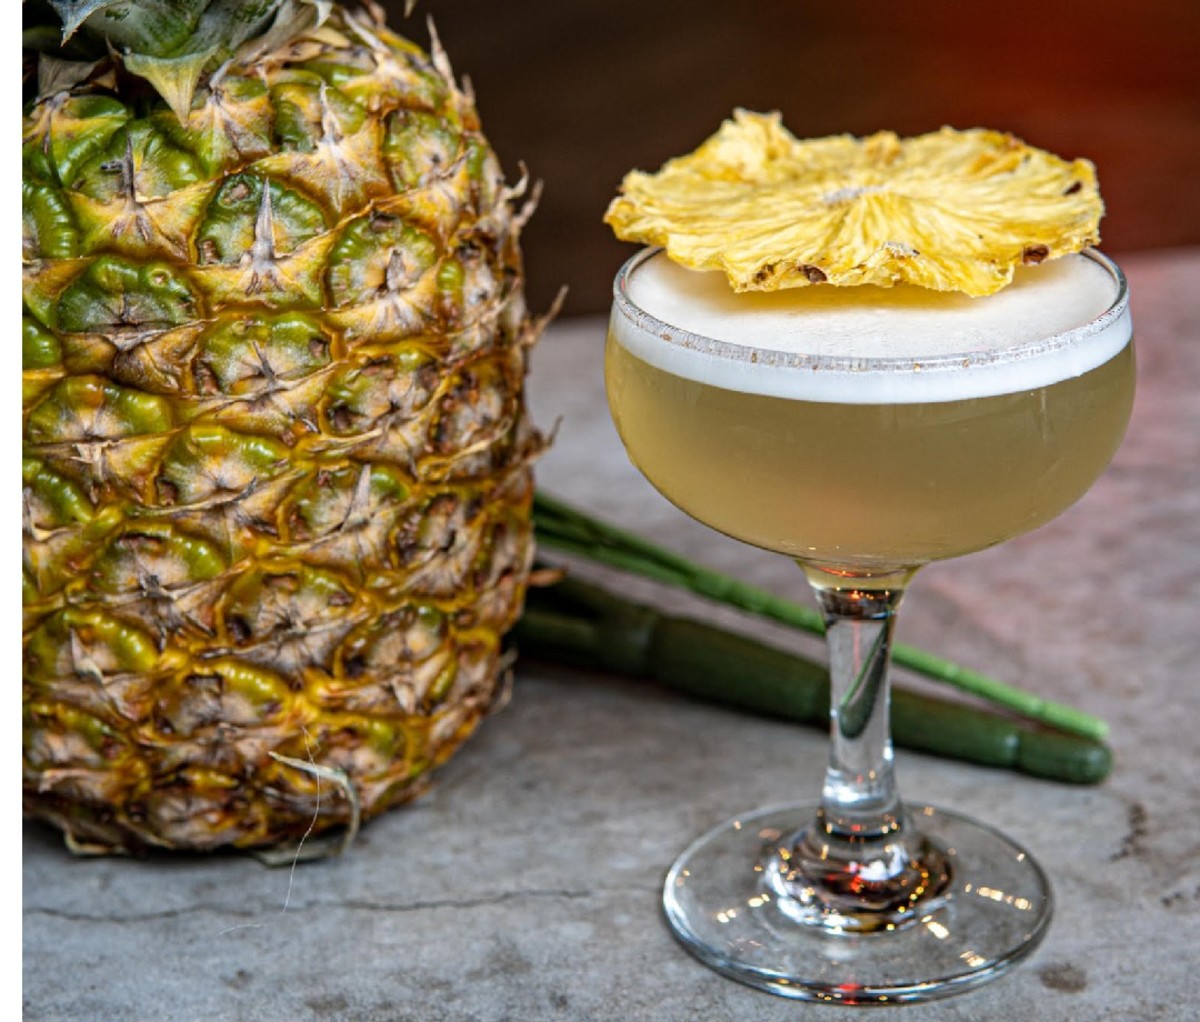 Cocktail with pineapple garnish at Two Arrows.